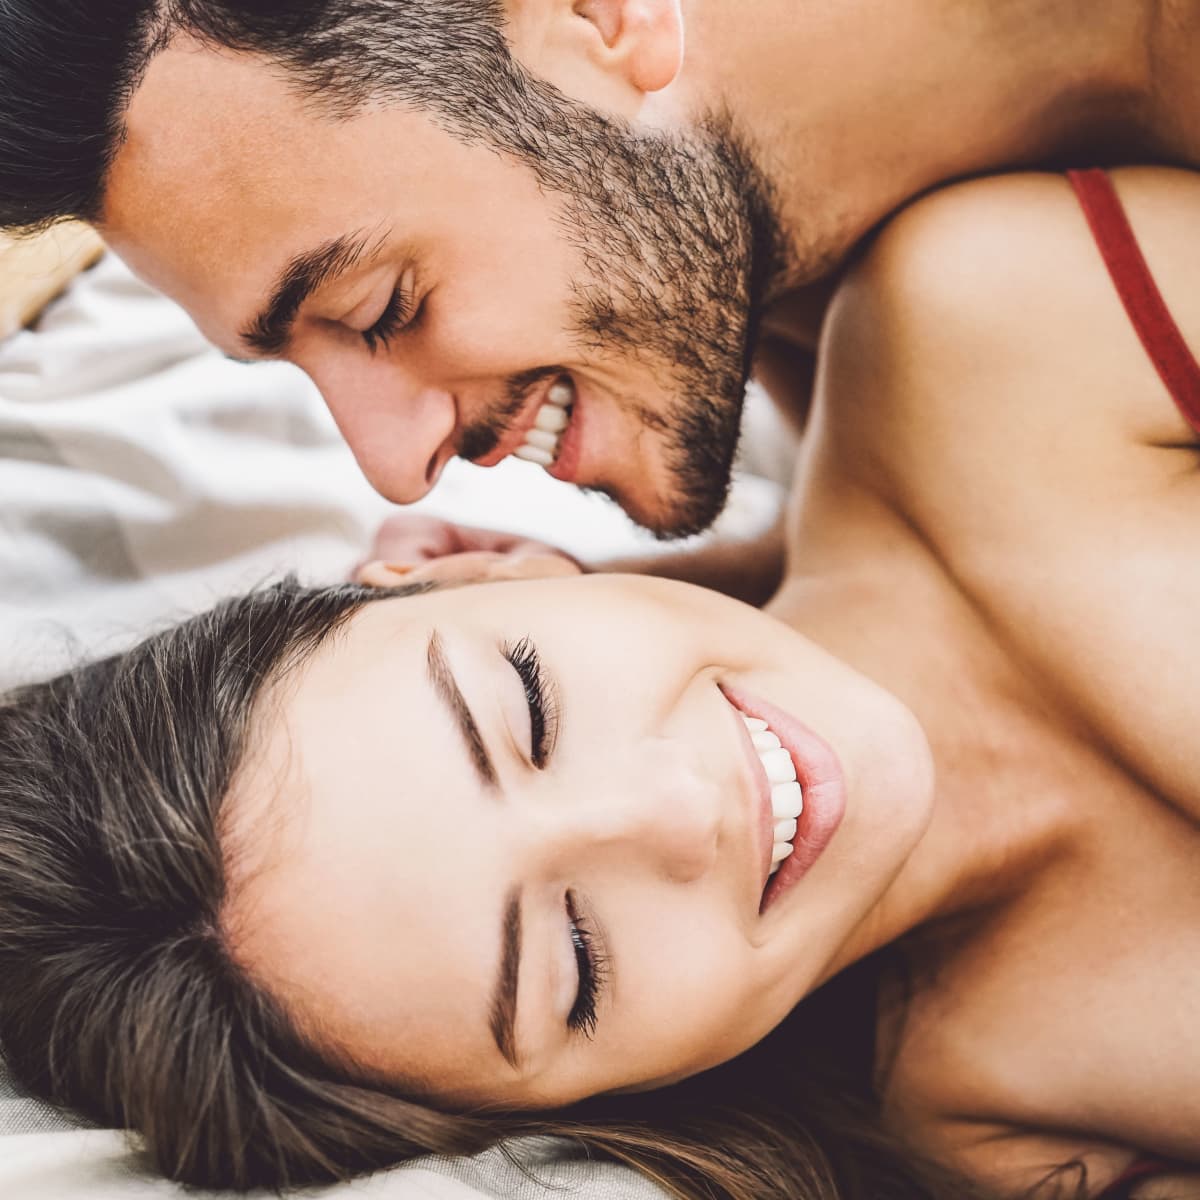 7 Secrets to Make Her Want You More photo picture